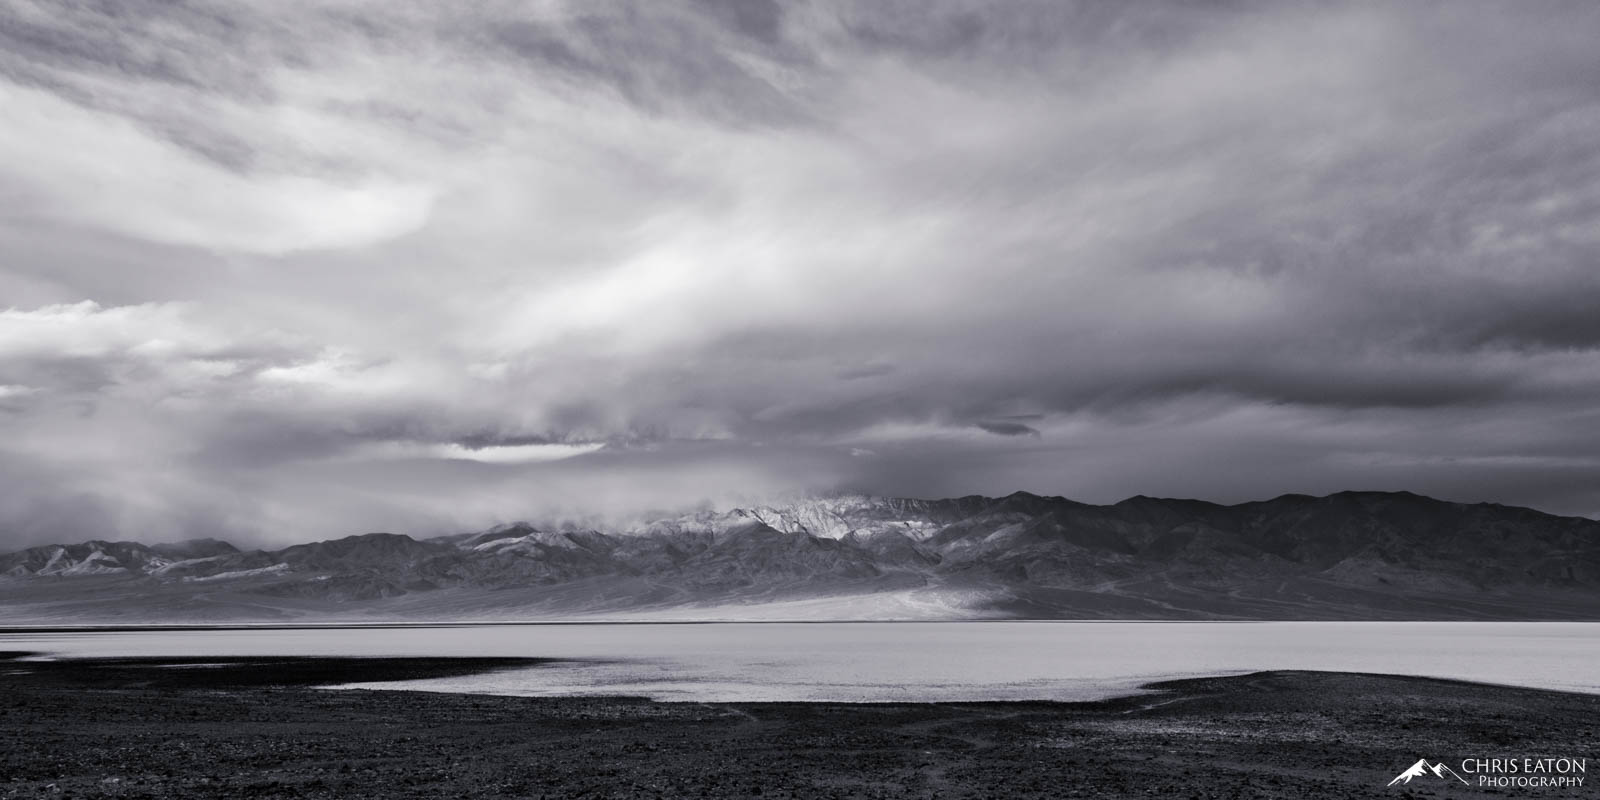 A later winter storm churns over Badwater Basin and the Panamint Range in Death Valley National Park. Telescope Peak is obscured...